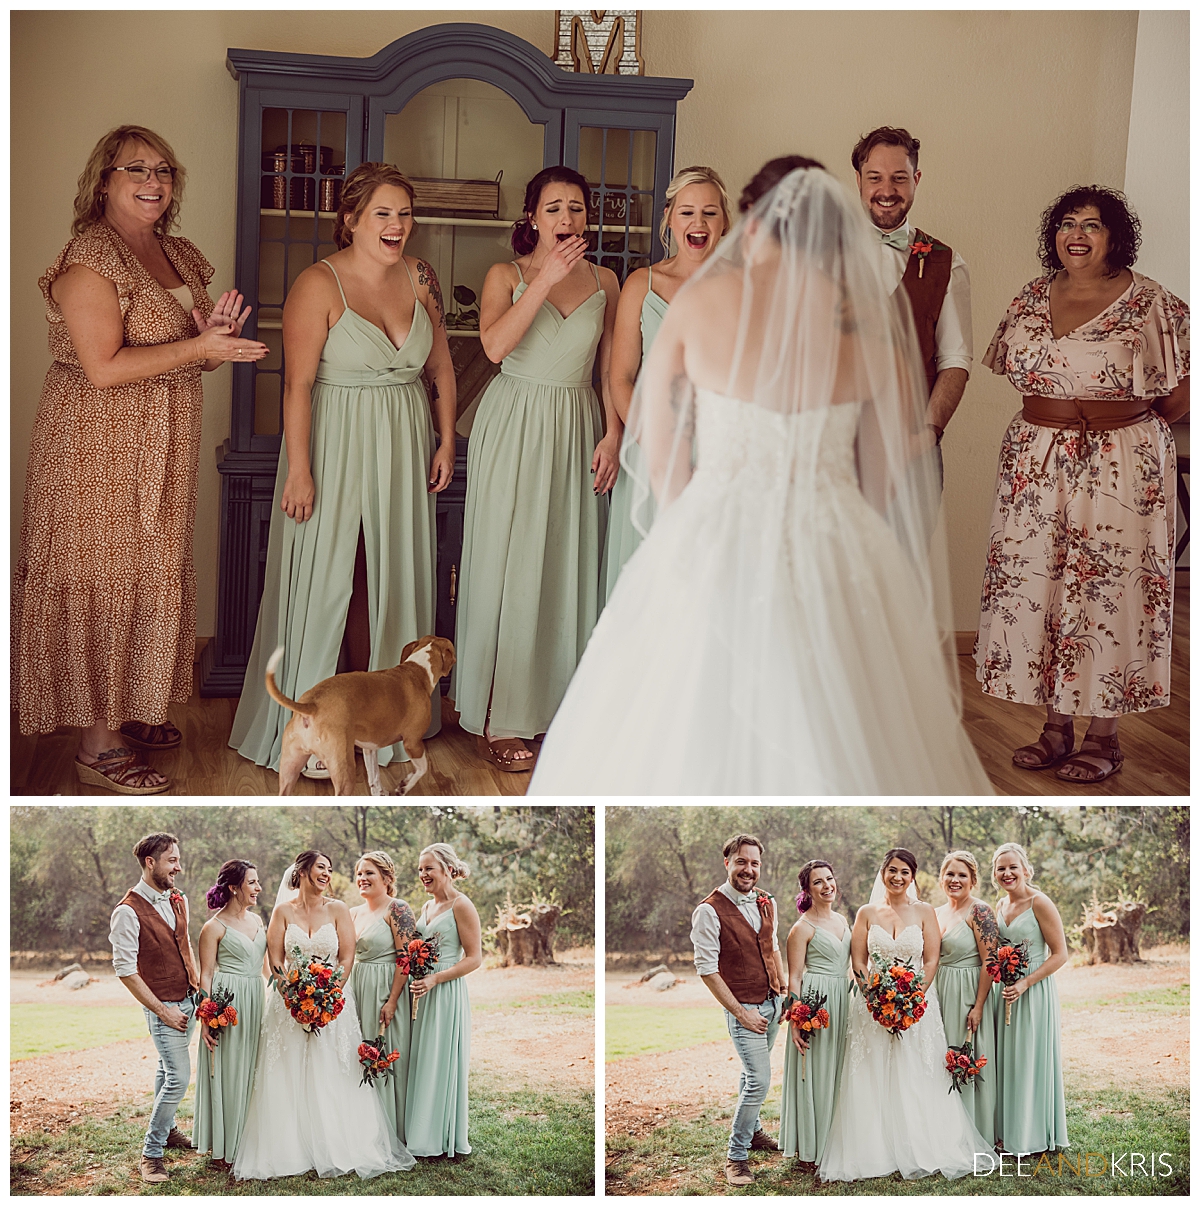 Three images of bride with her wedding party.